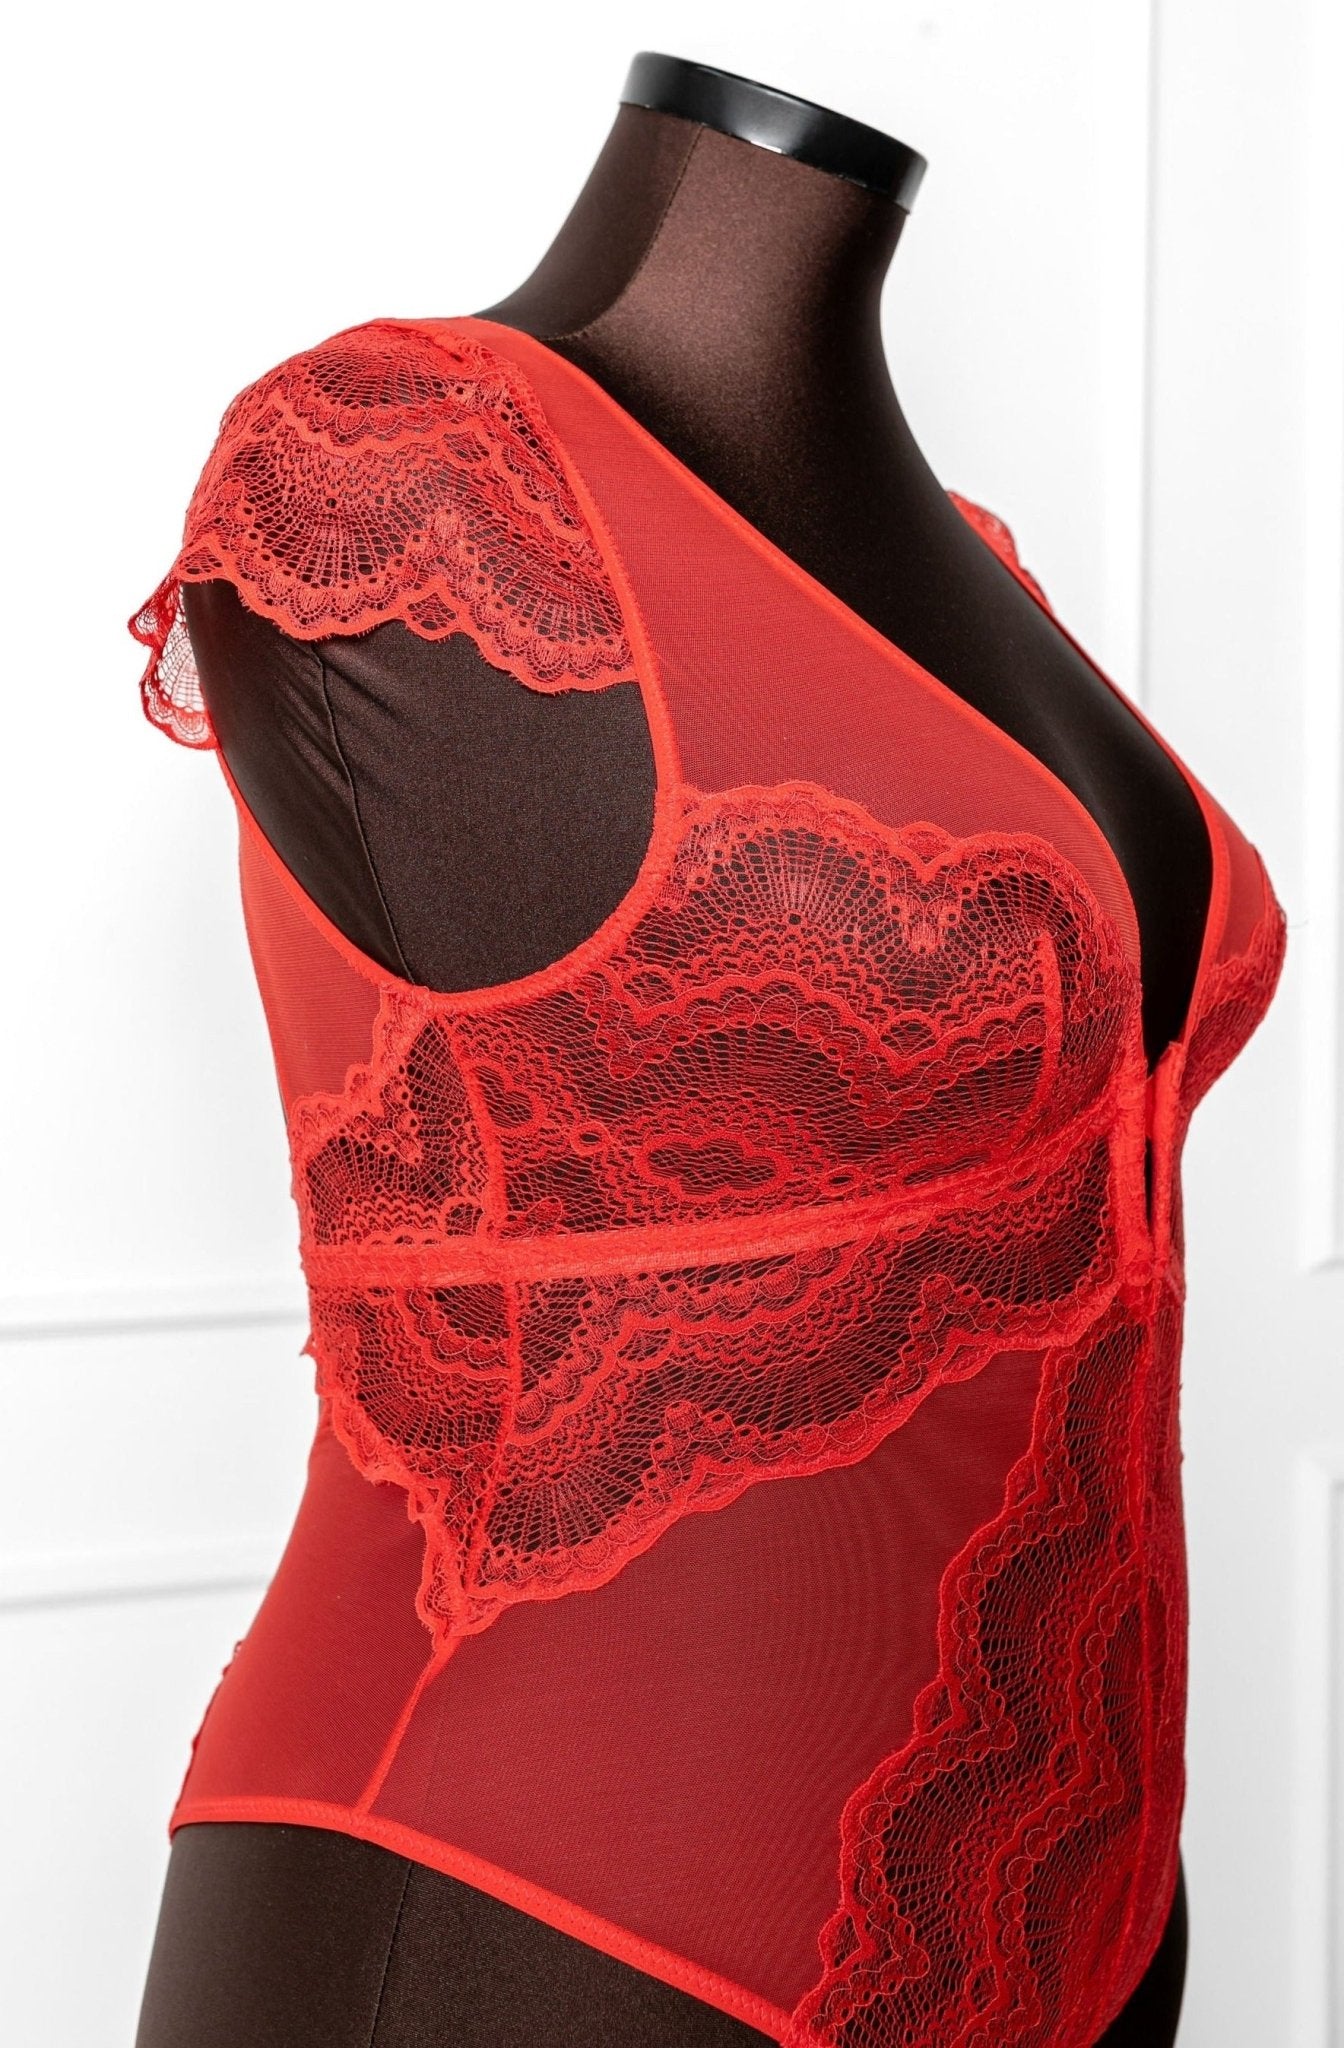 Lace & Mesh High Leg Crotchless Teddy - Poppy Red - Mentionables